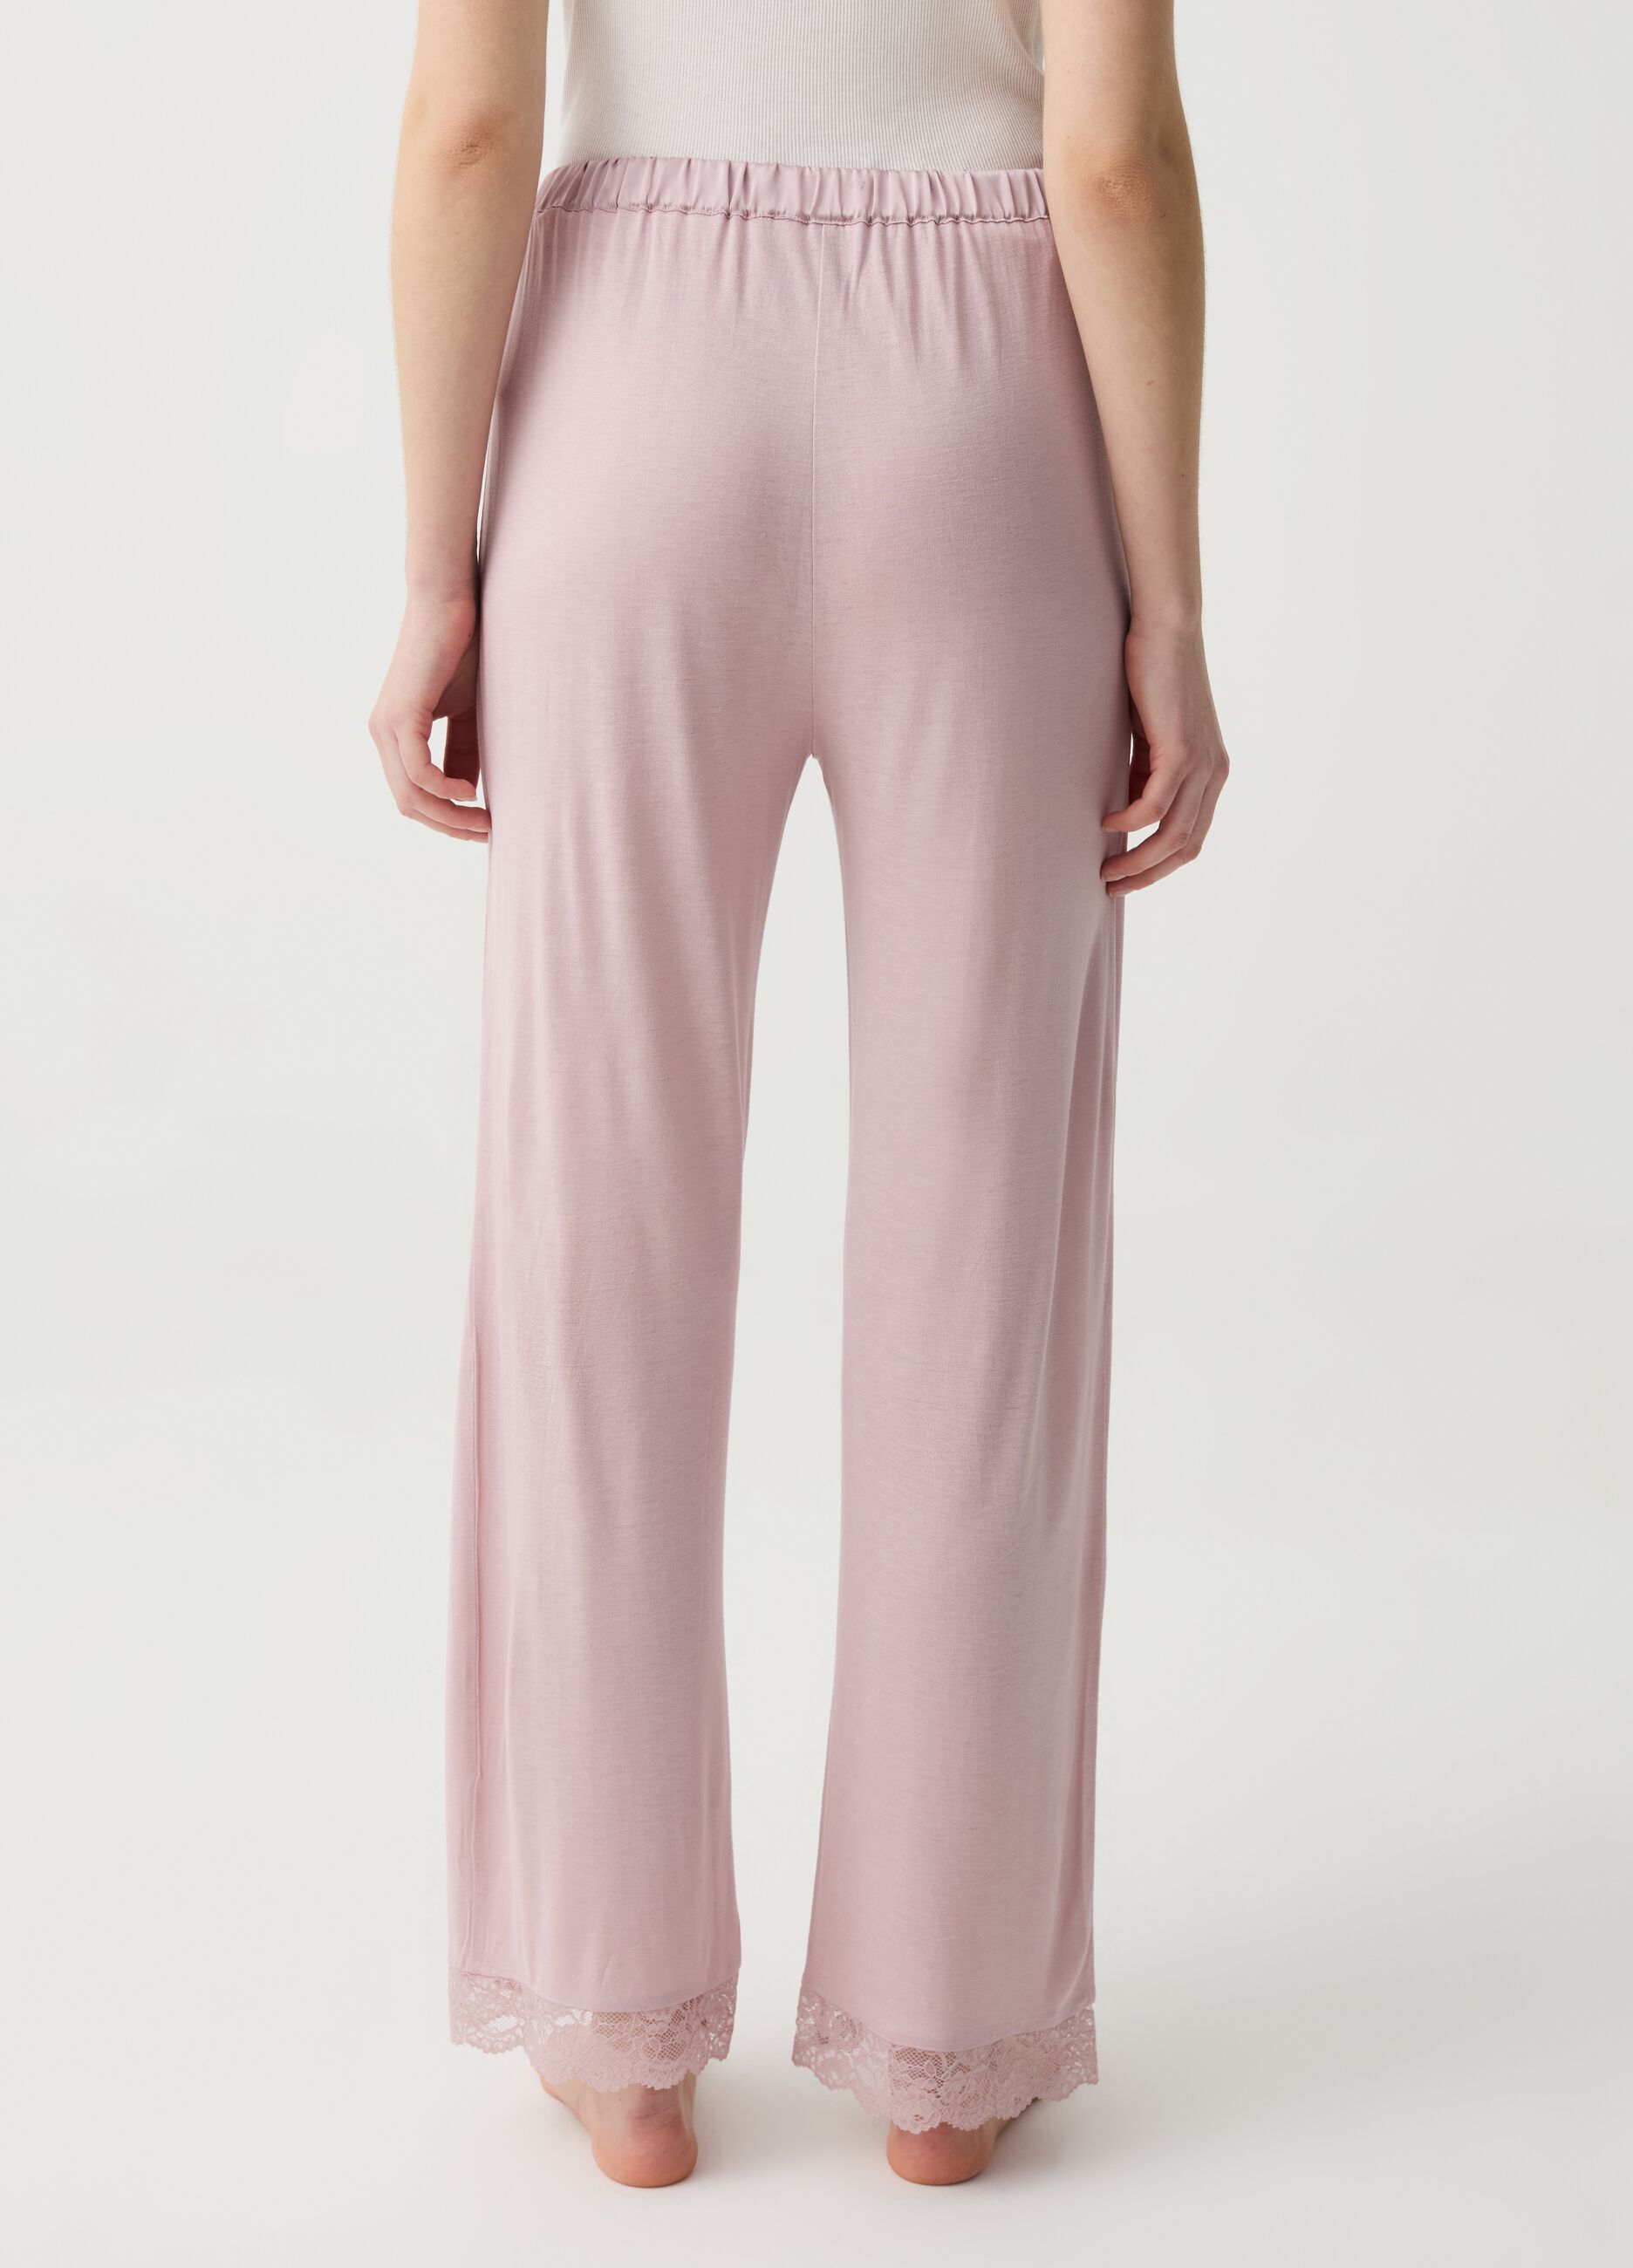 Pyjama trousers with floral lace